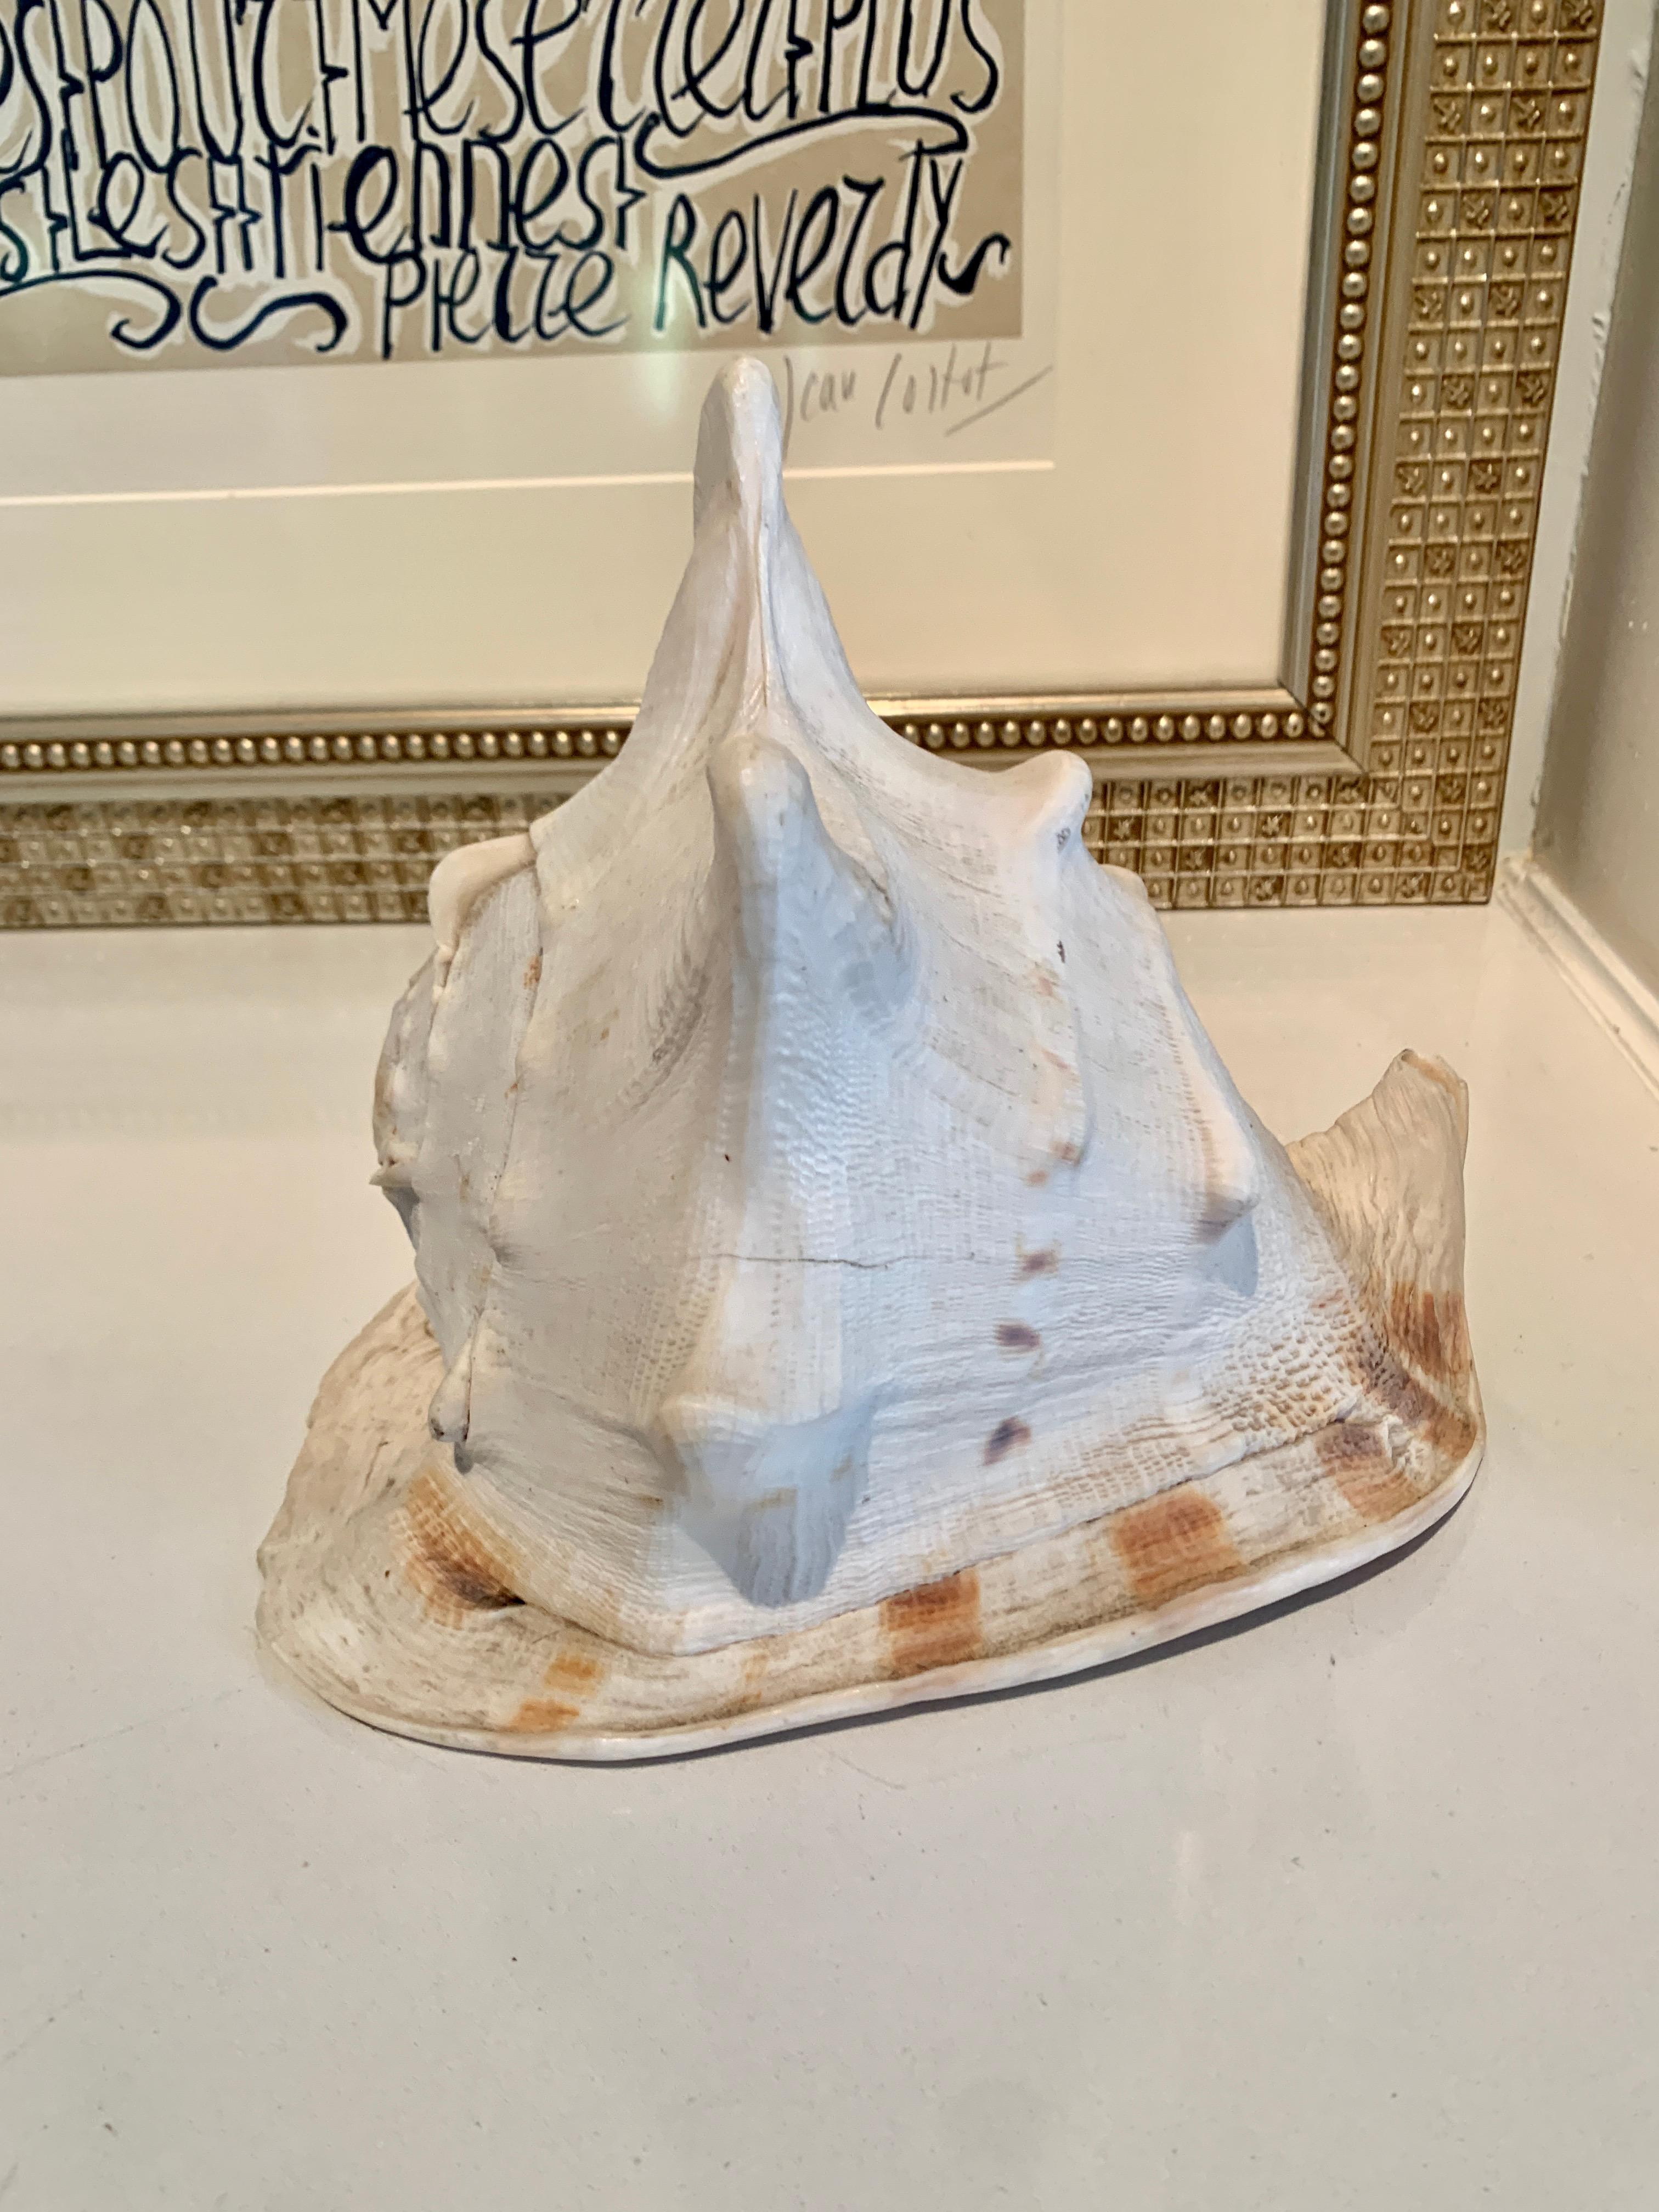 A lovely Queen Helmet Conchshell... Brilliantly colored and a statement... a compliment to many spaces and especially those with nautical or water themes.